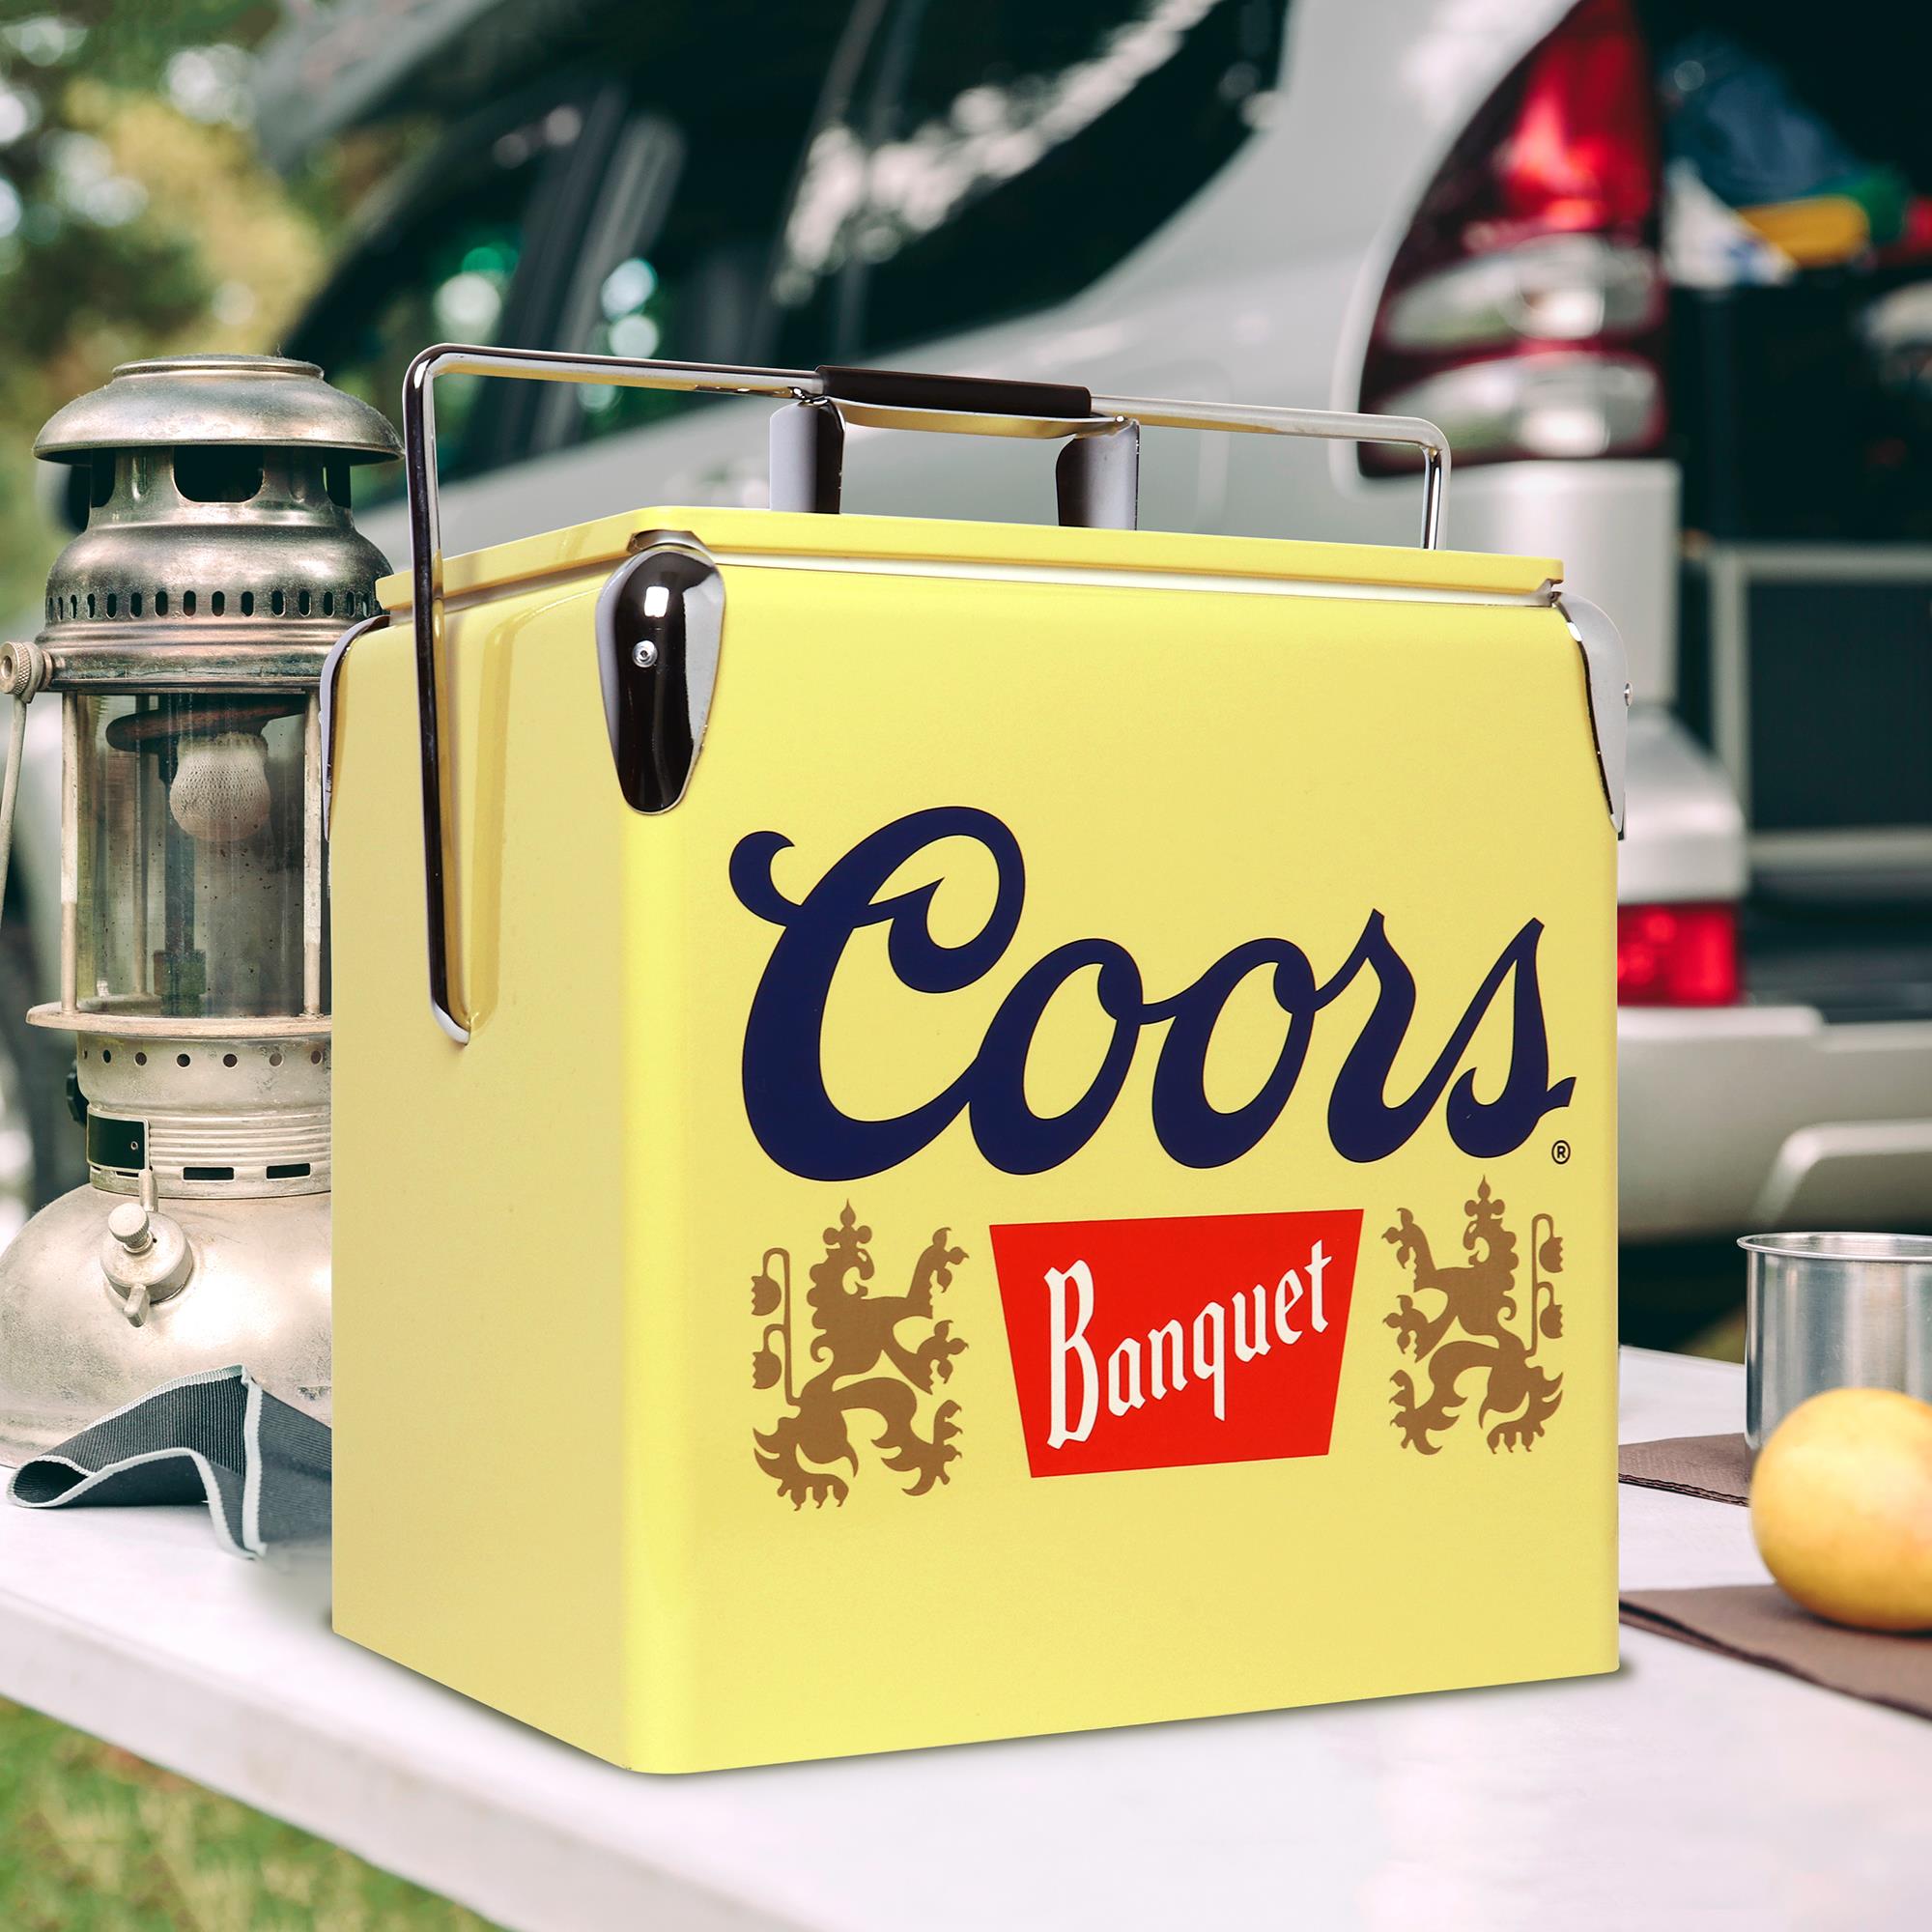  Coors Banquet Retro Ice Chest Cooler with Bottle Opener 13L (14  qt), 18 Can Capacity, Yellow and Silver, Vintage Style Ice Bucket for  Camping, Beach, Picnic, RV, BBQs, Tailgating, Fishing 